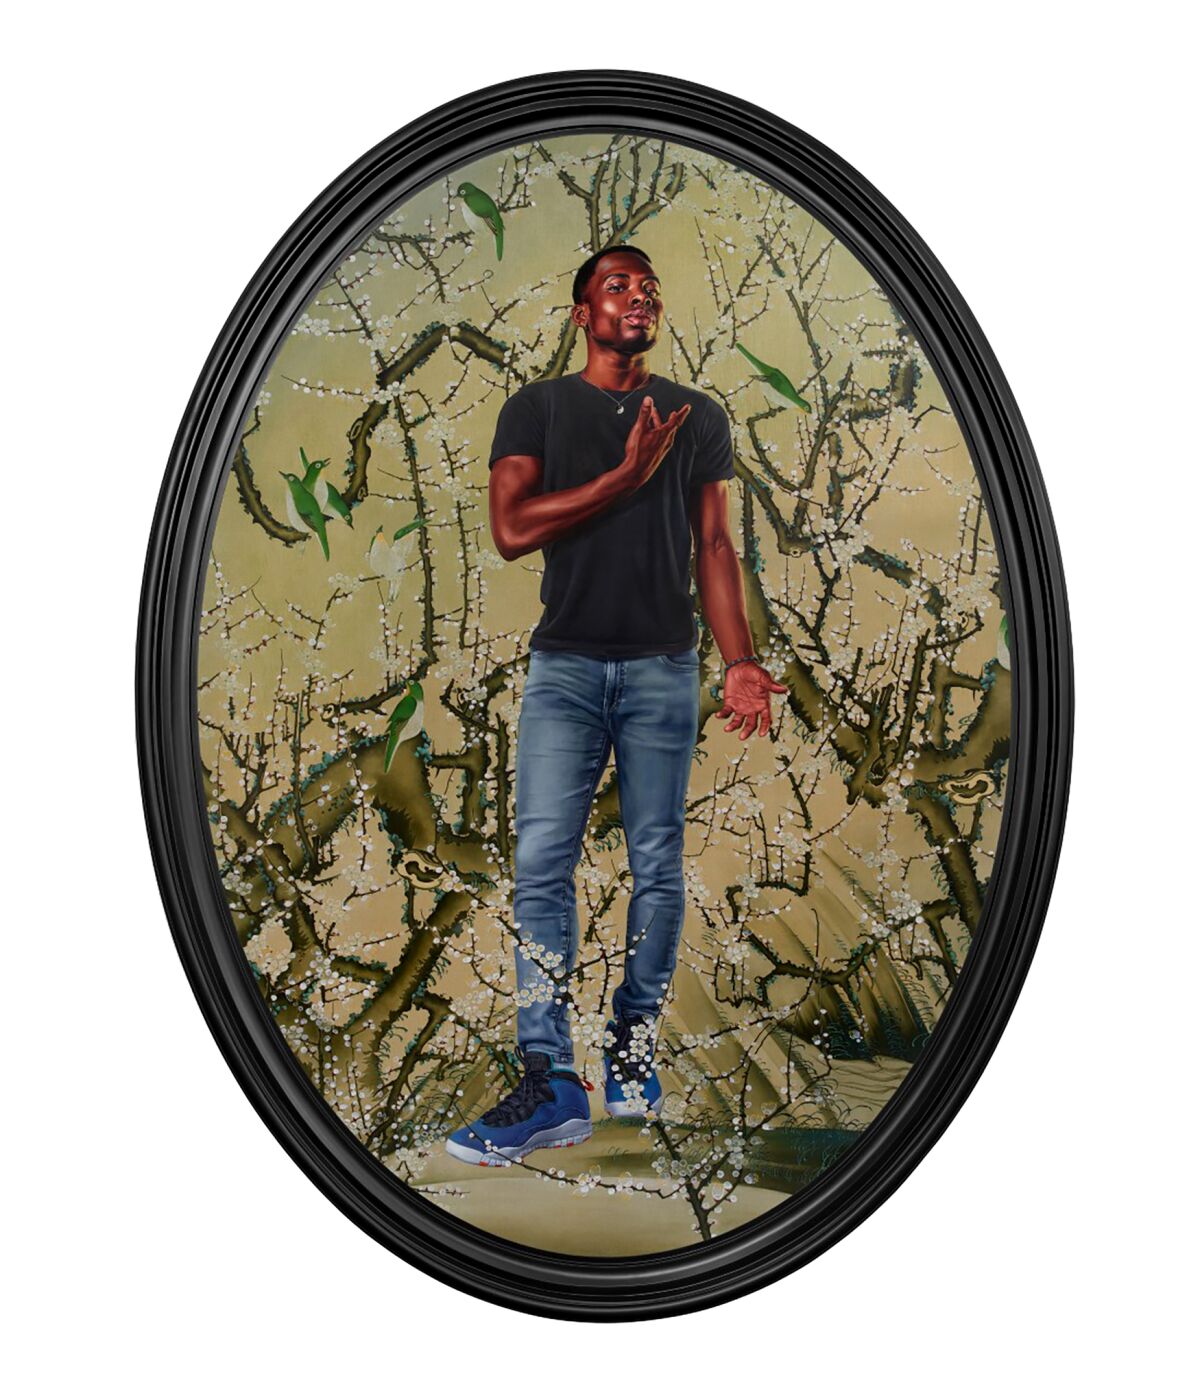 Kehinde Wiley, "Portrait of John Adewumi," 2023. Painting of a man surrounded by branches.